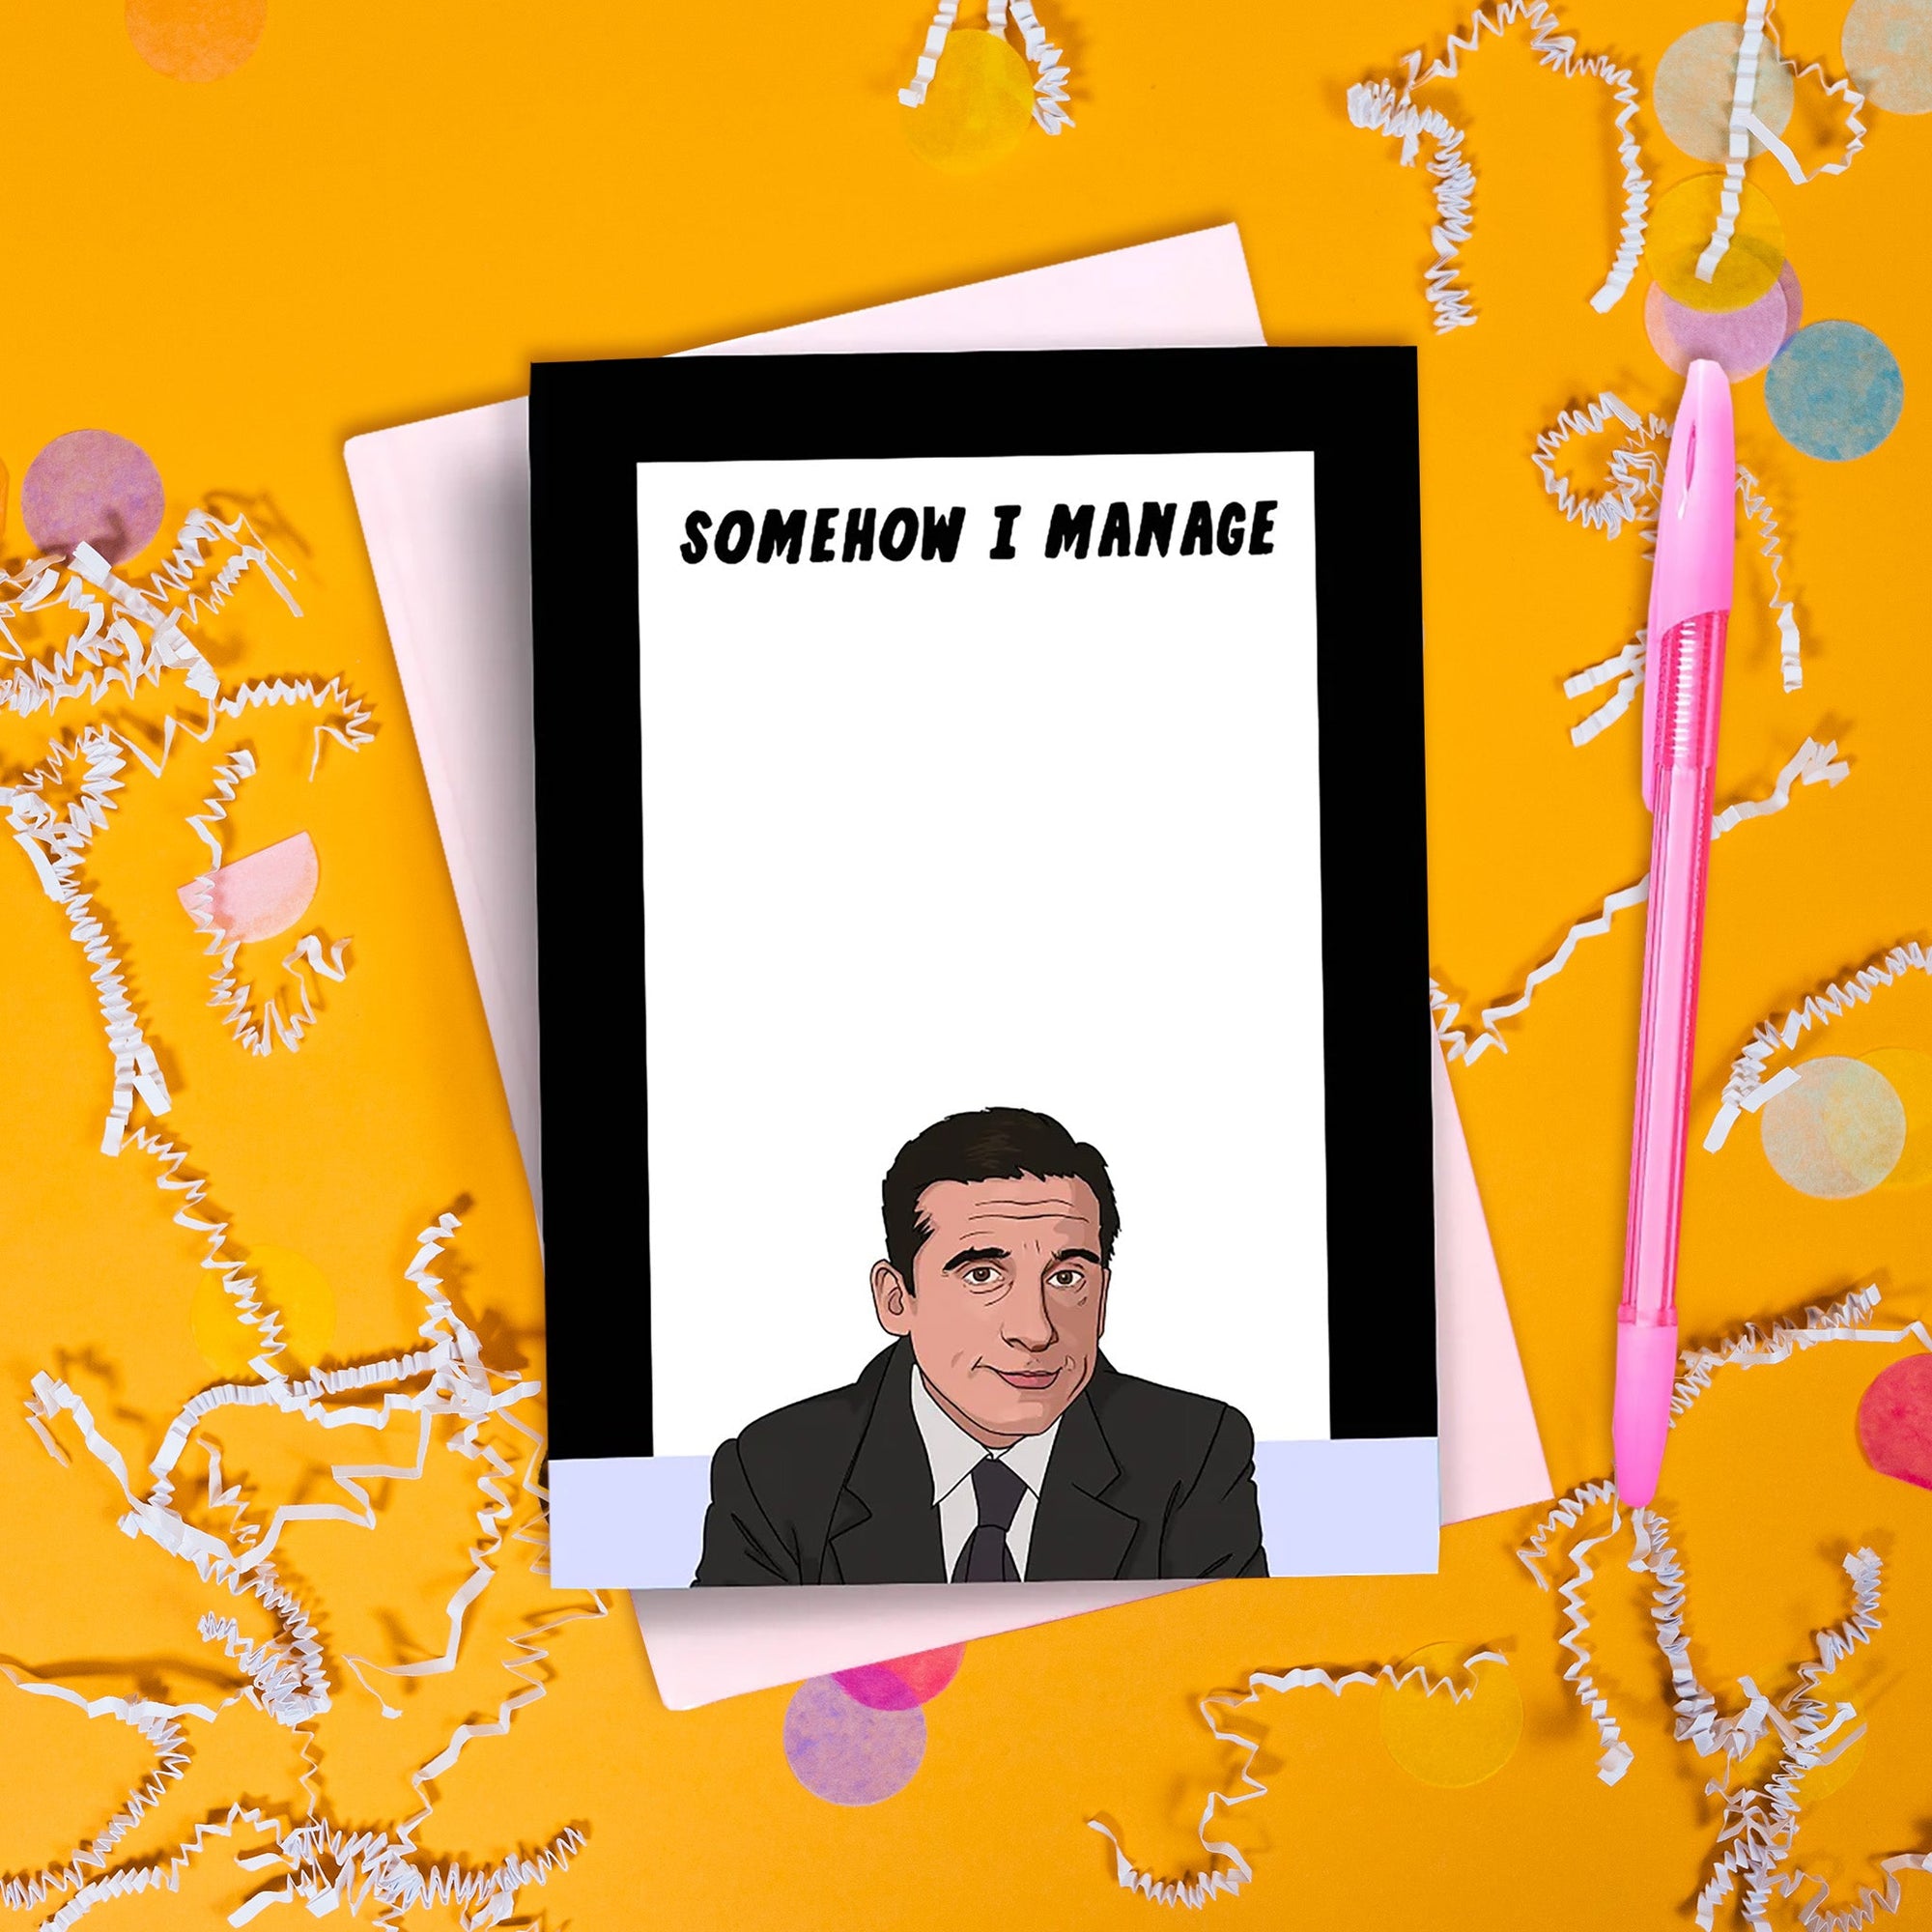 On a sunny mustard background sits a notepad with a pen. There is white crinkle and big, colorful confetti scattered around. The Office inspired notepad has a black and lavender border with a white recangle on top. It says at the top "SOMEHOW I MANAGE" in black, all caps handwritten lettering. On the bottom is an illustration of Michael Scott wearing a black suit and black tie with white shirt.